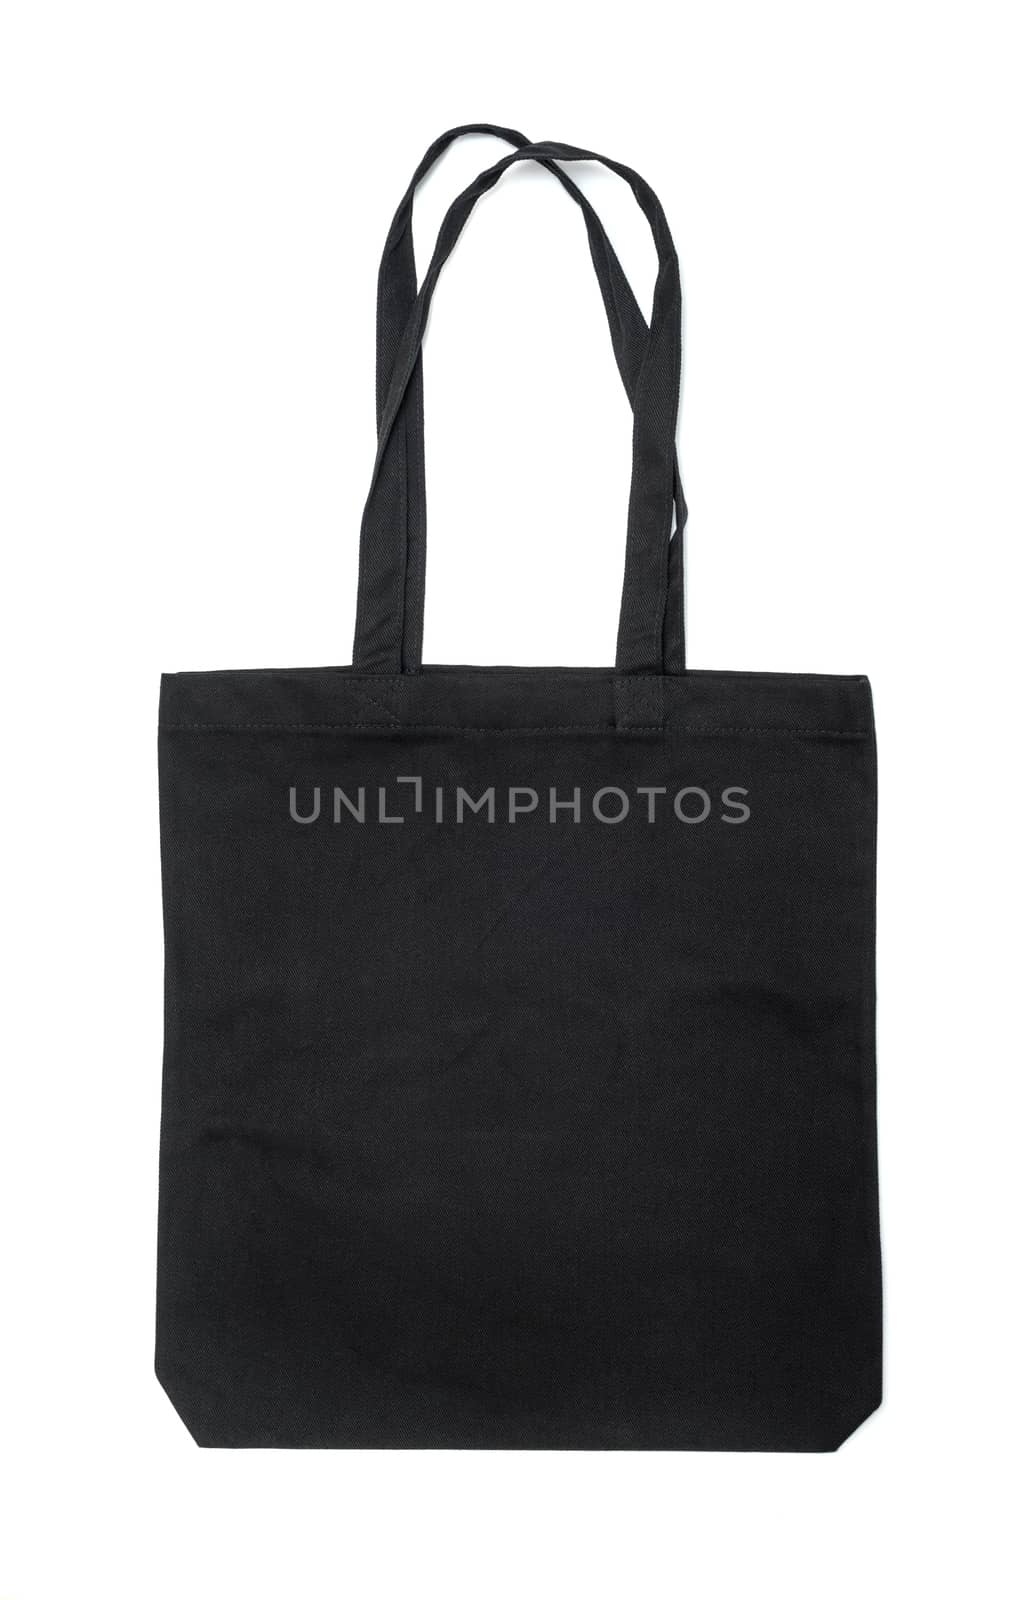 Black fabric bag isolated on white background by DNKSTUDIO